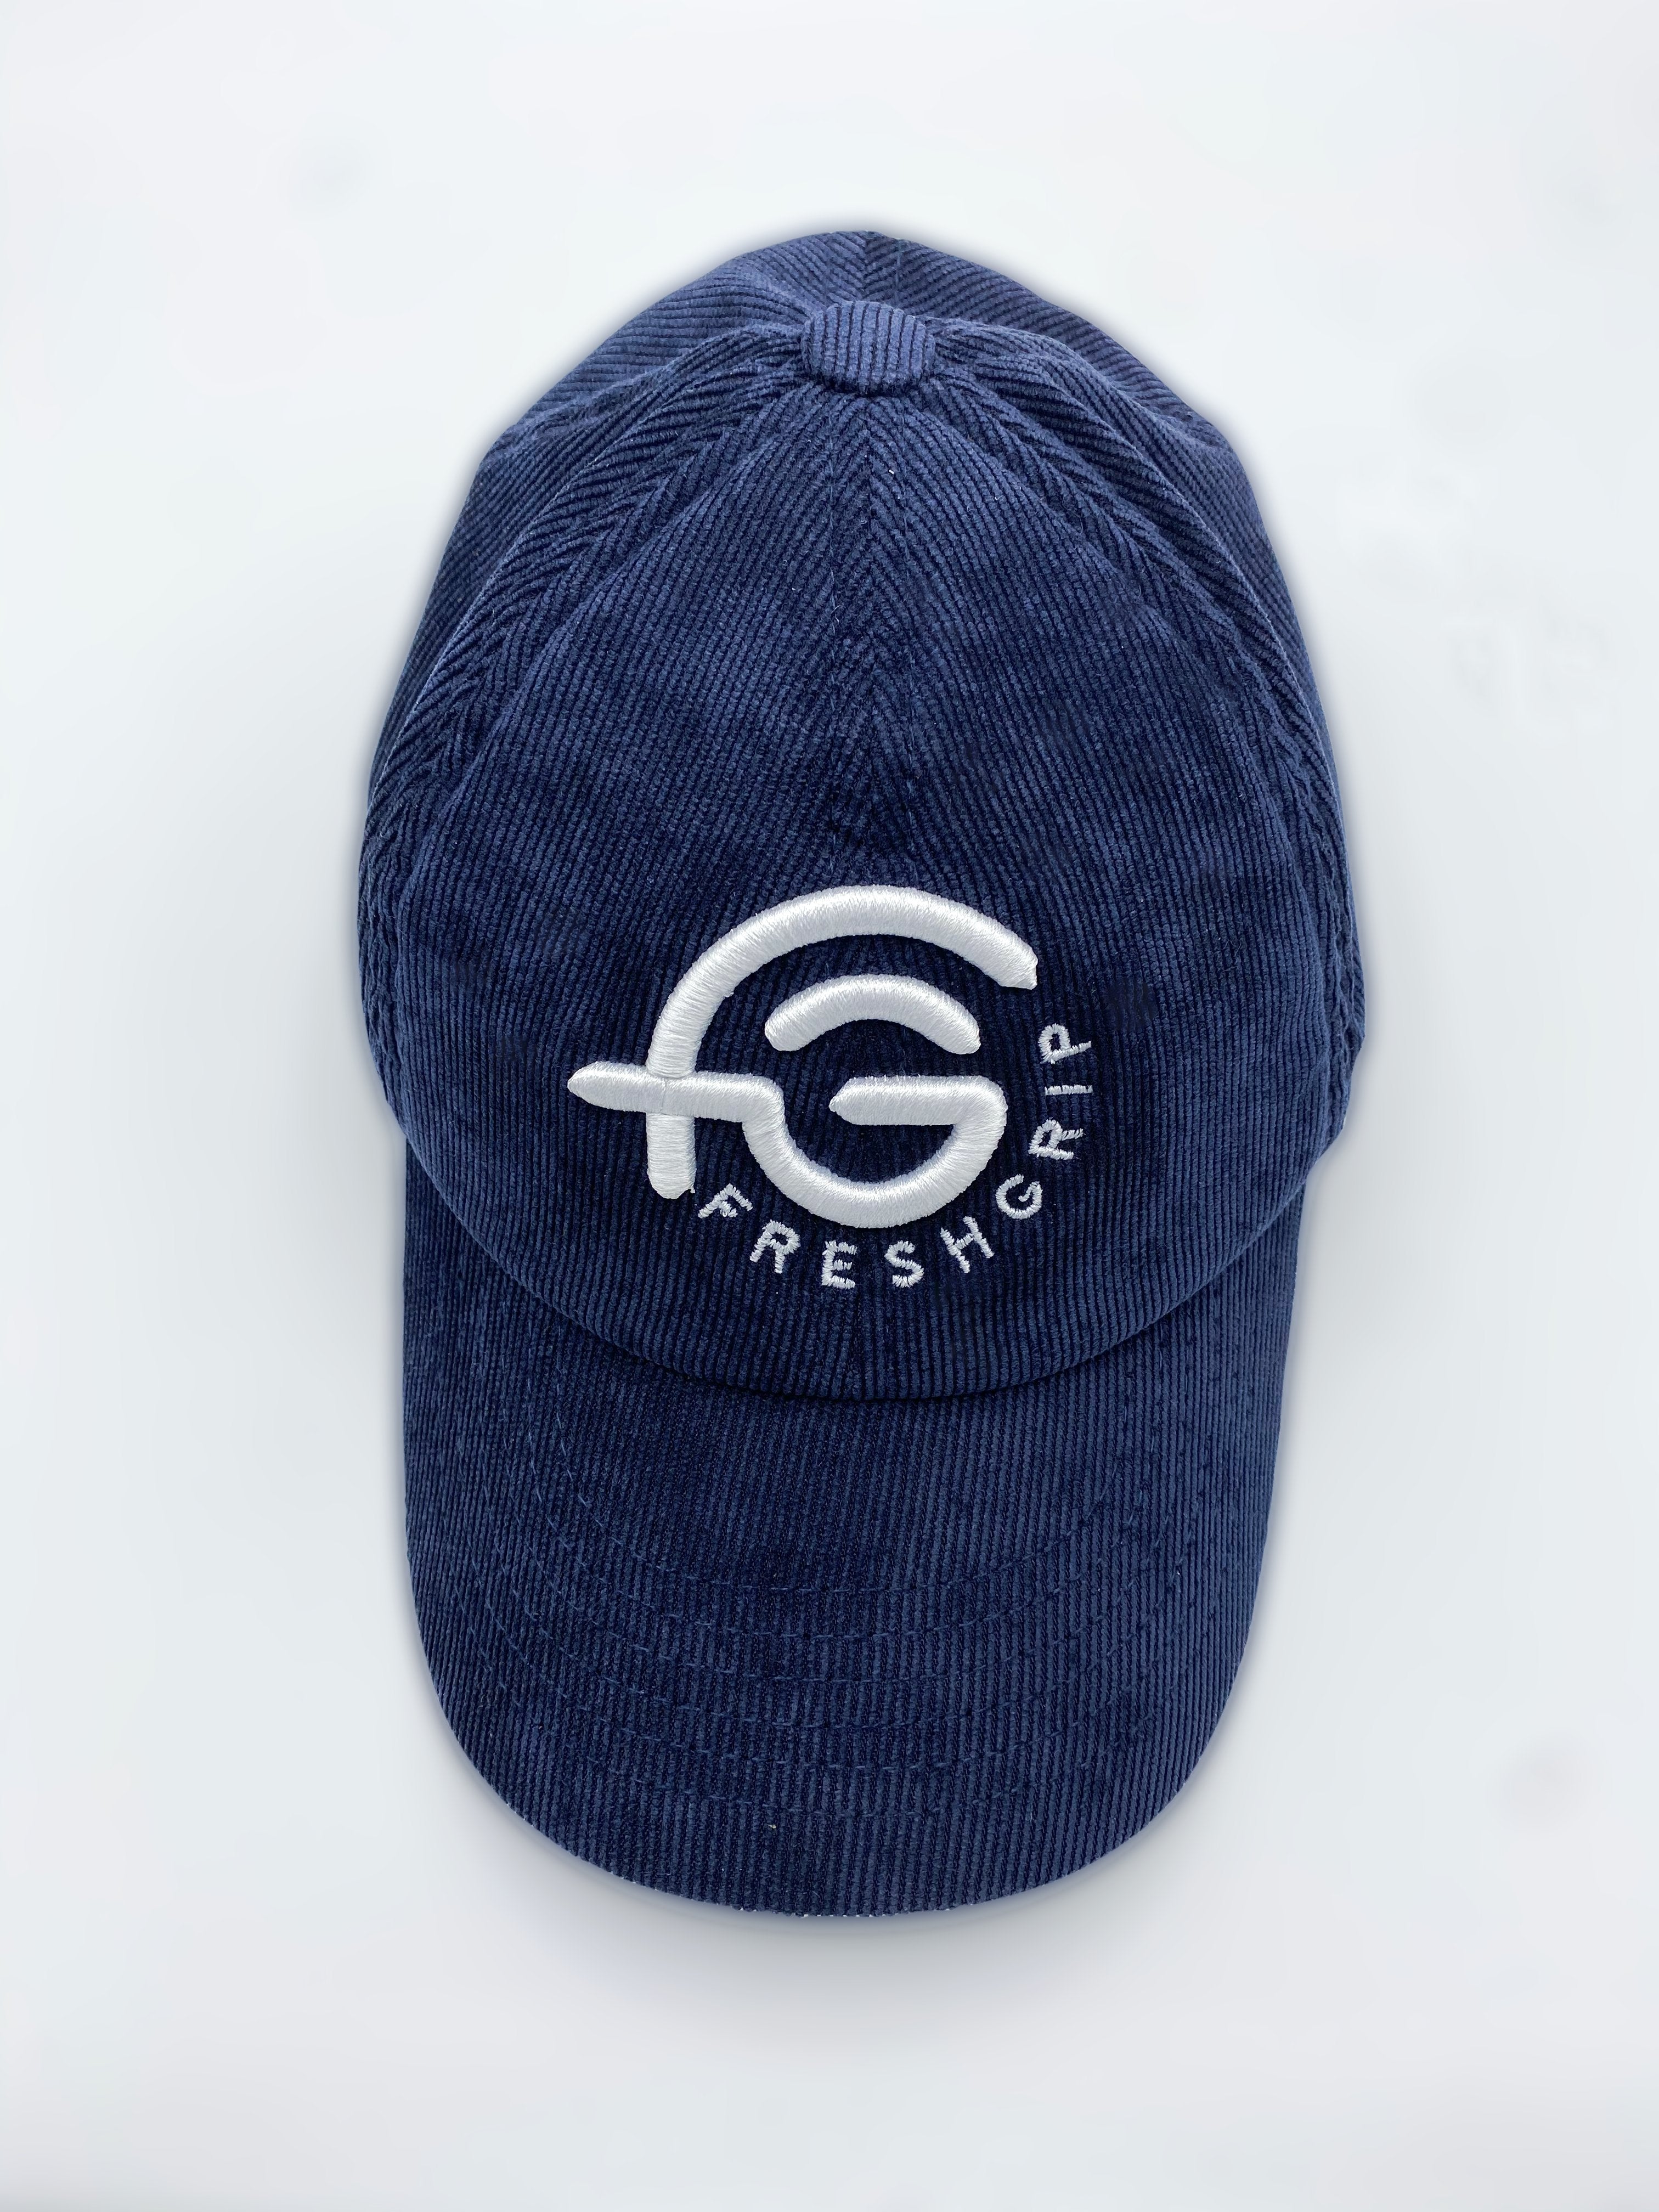 Blue dad hat, perfect for on and off the golf course